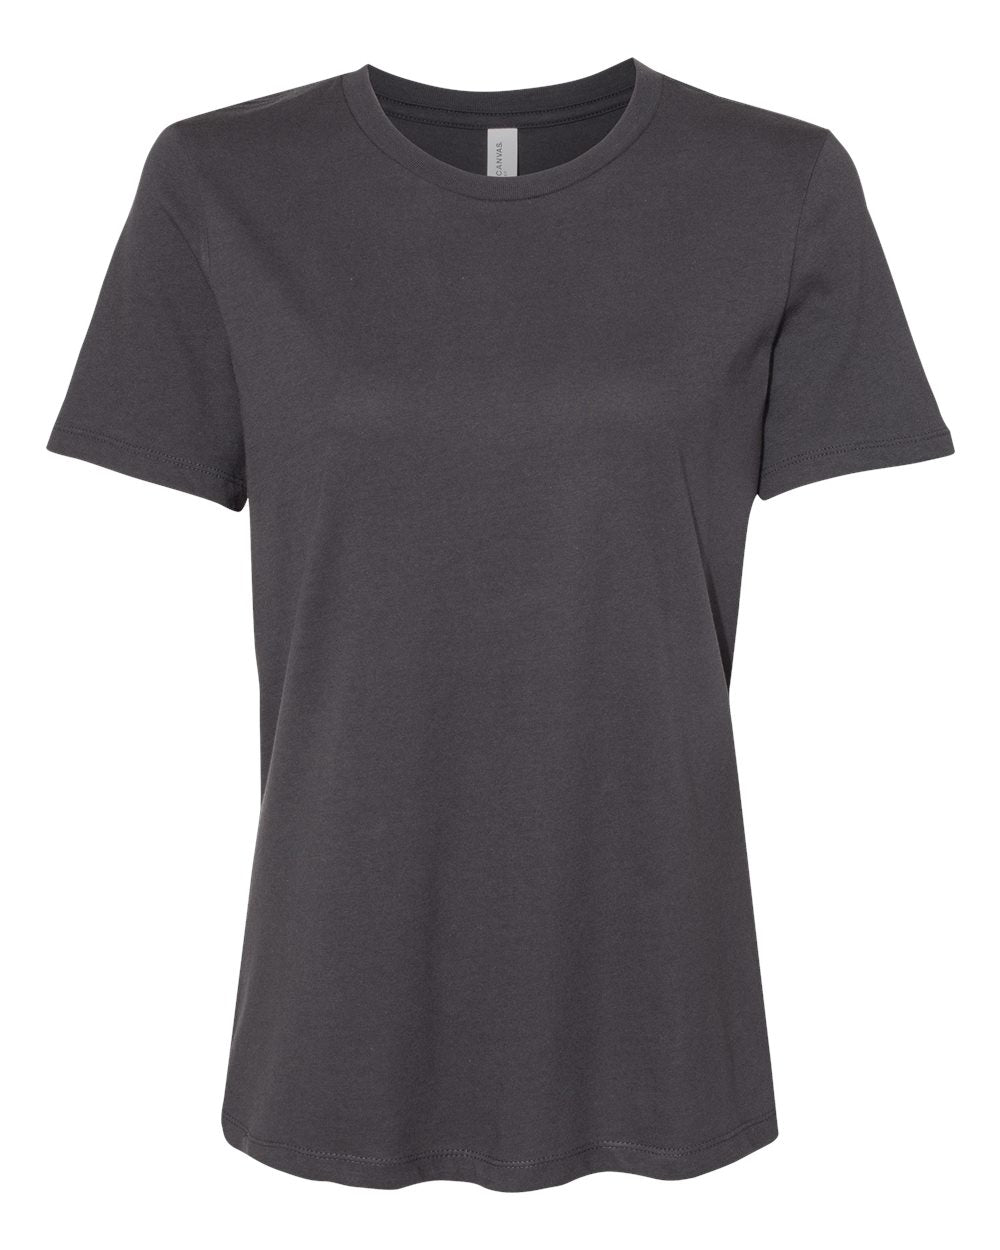 Pretreated BELLA+CANVAS 6400 Women's Relaxed Jersey Tee